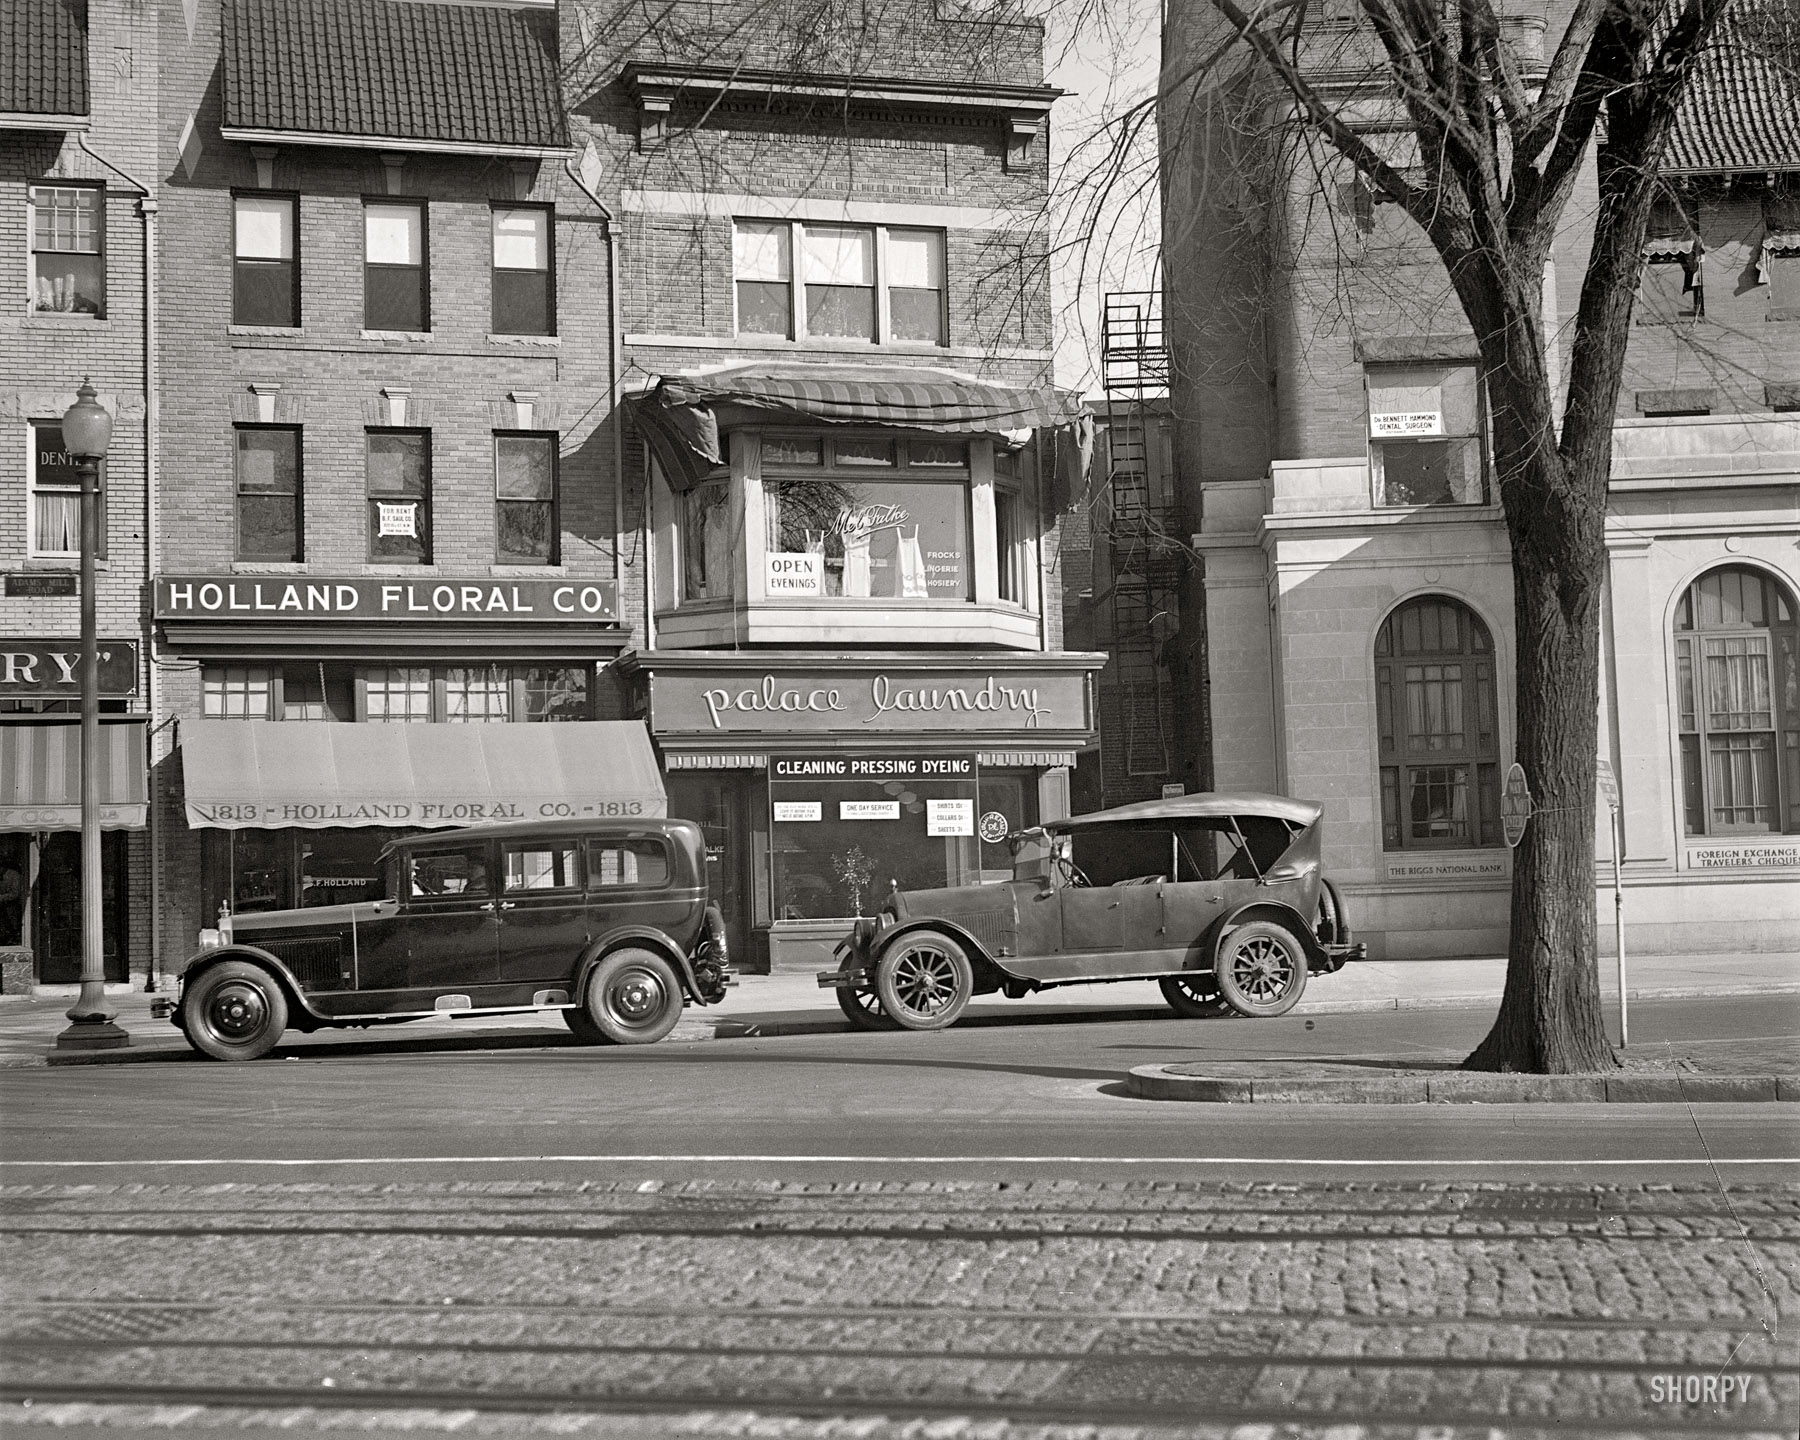 Washington, D.C., circa 1925. "Palace Laundry." 1811 Adams Mill Road N.W. National Photo Company Collection glass negative. View full size.